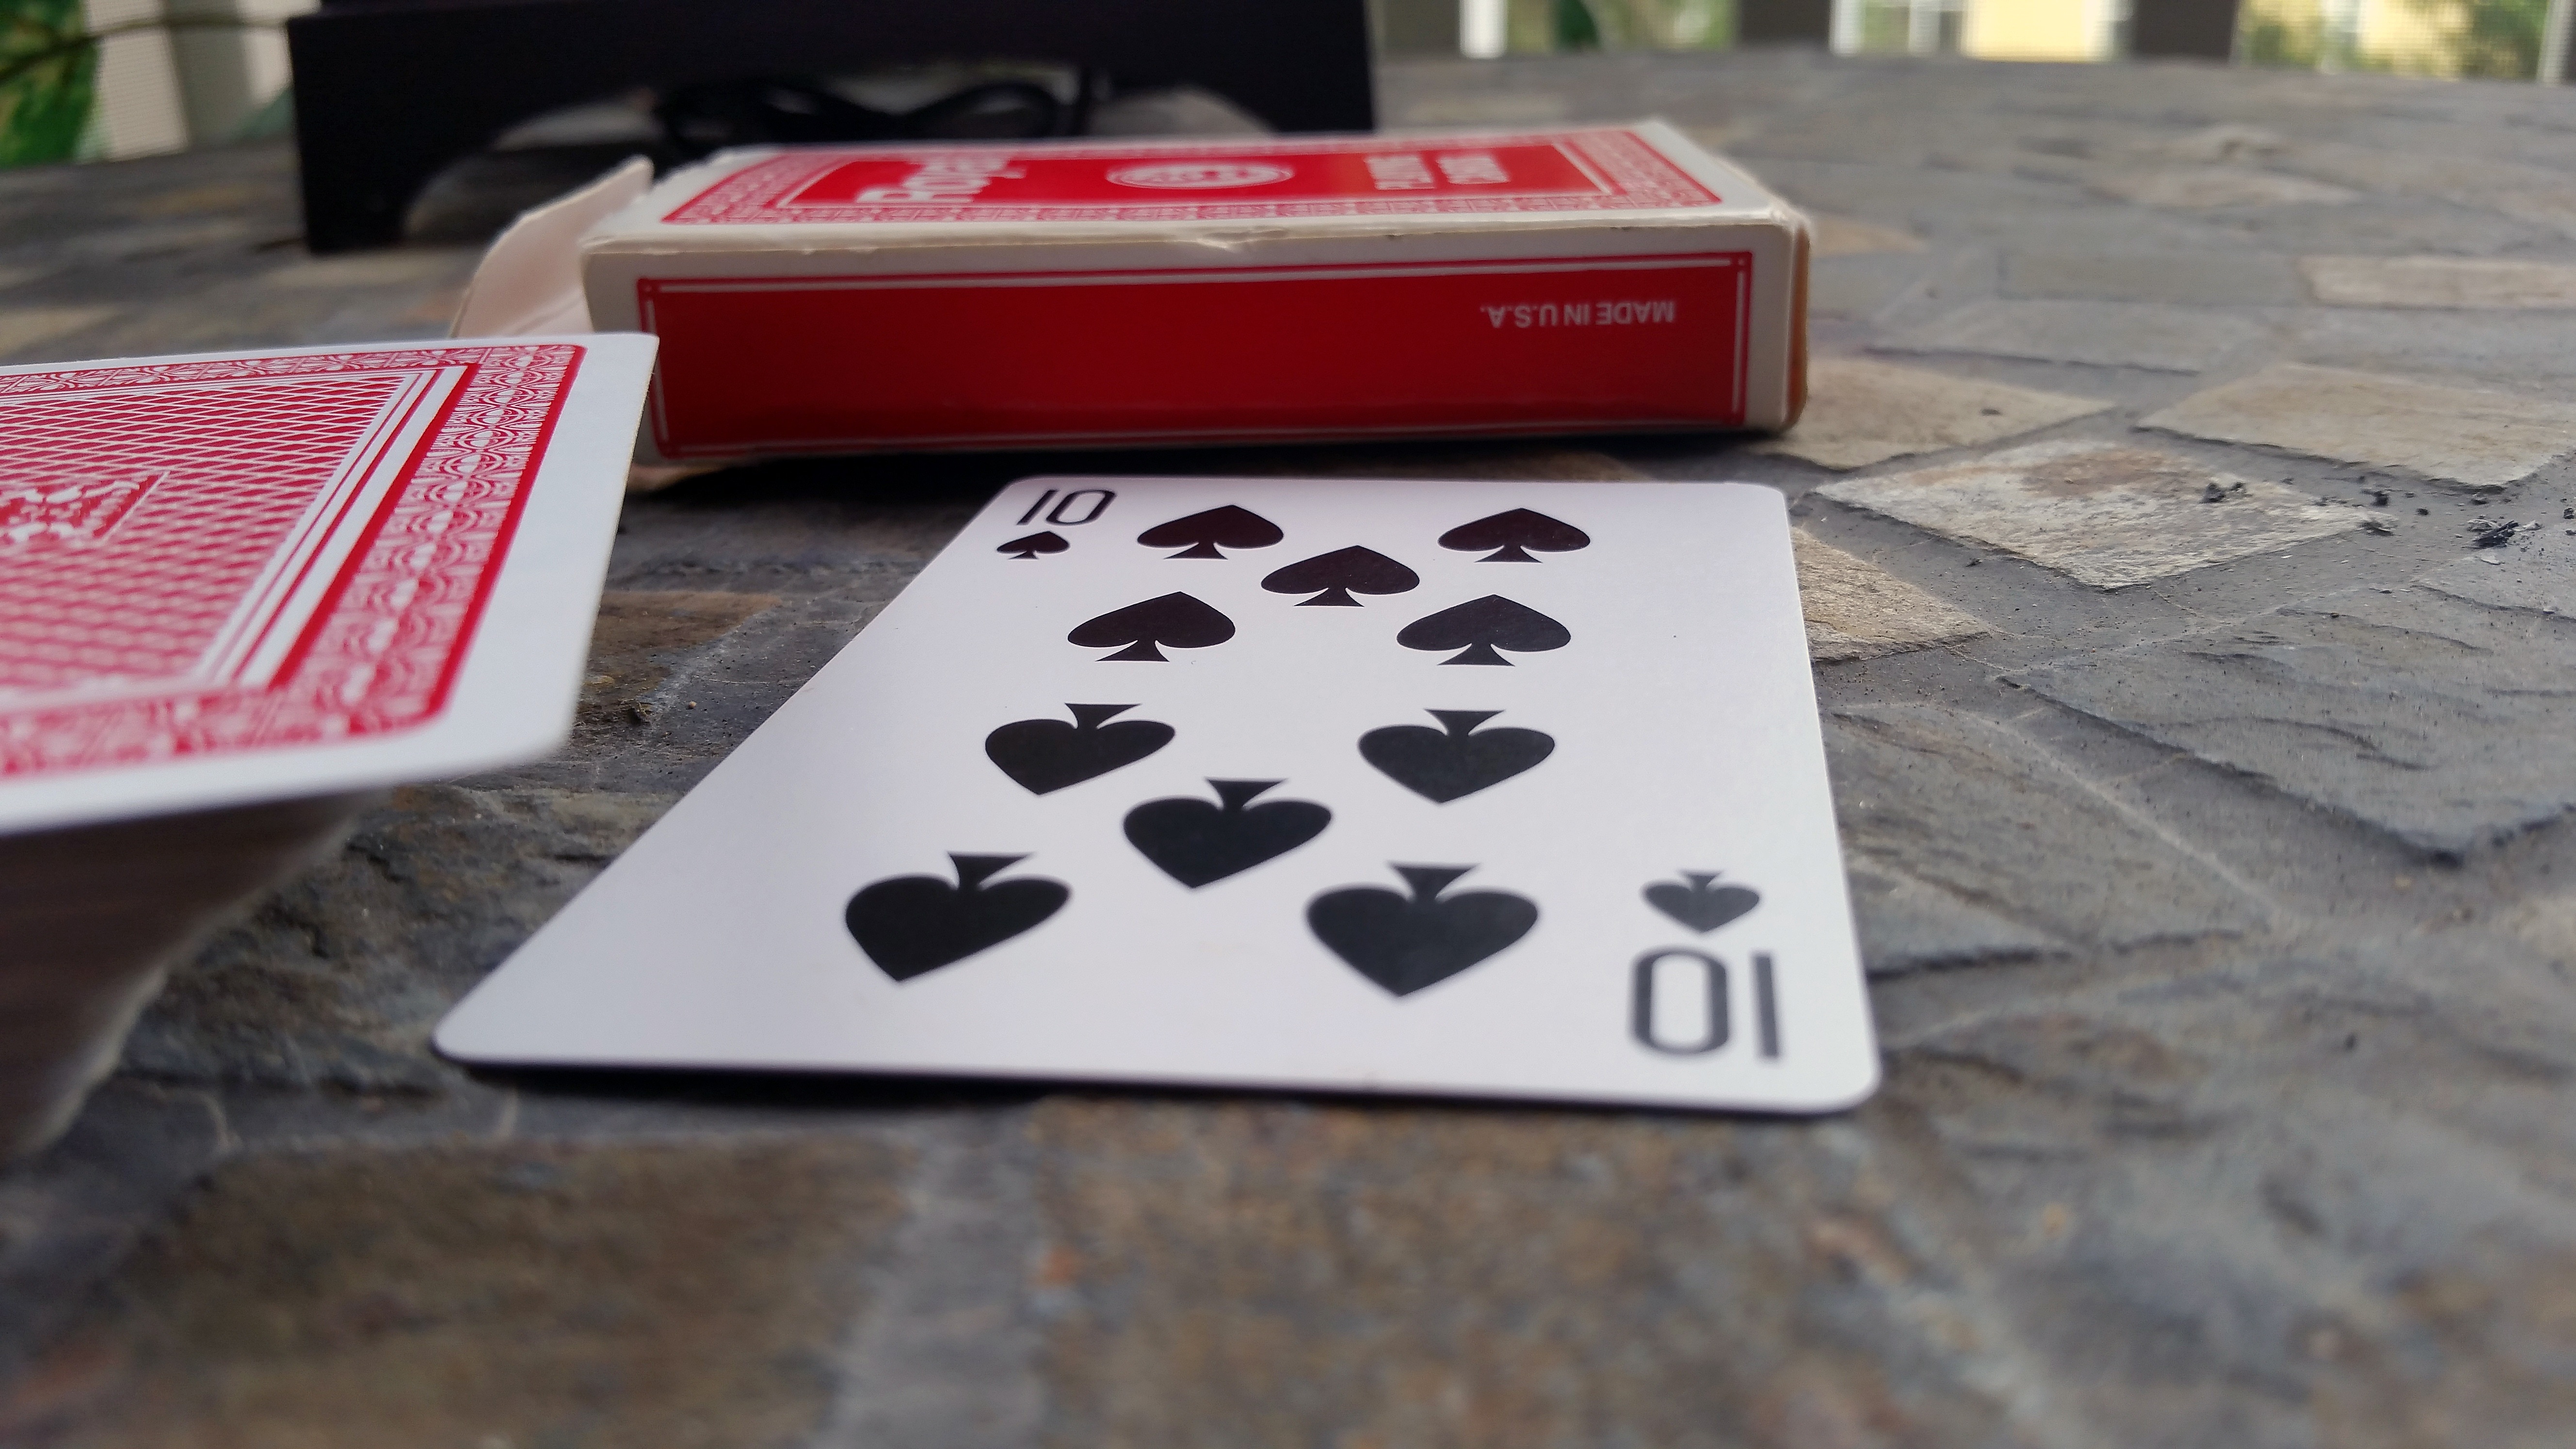 10 of clubs playing card